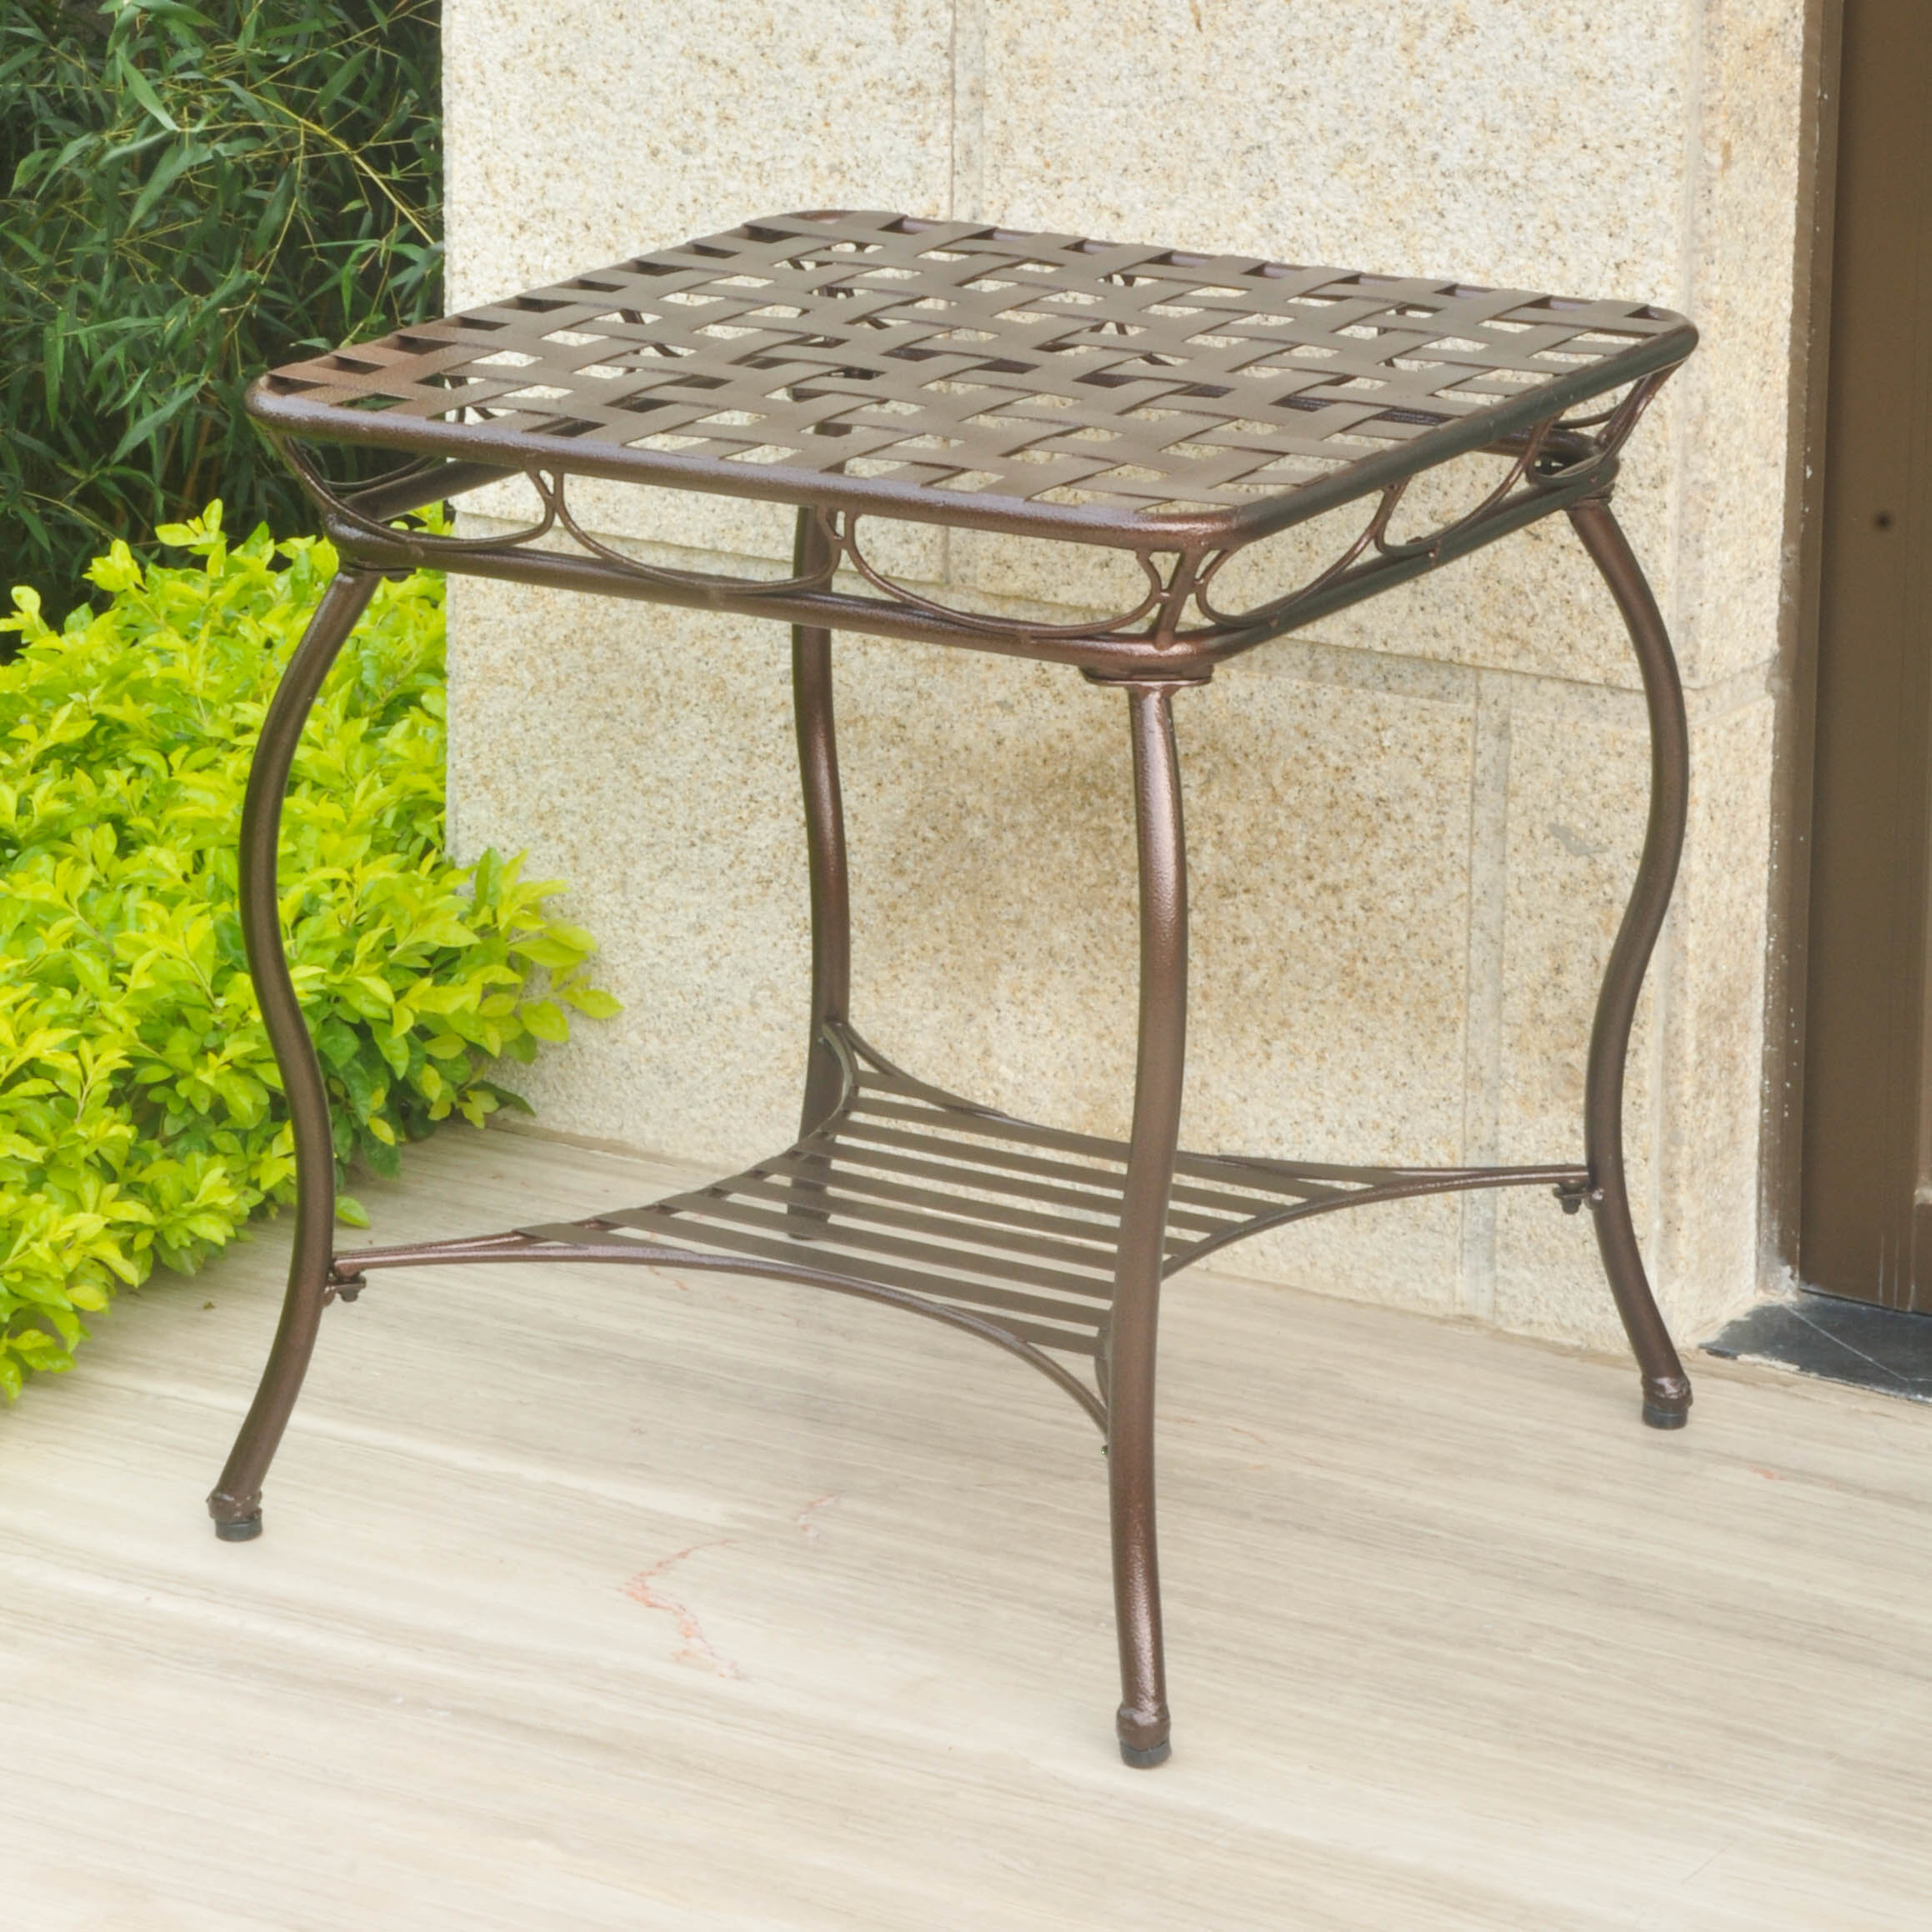 patio tables joss main schilling side table stratford wicker folding accent bronze quickview antique black ice cooler storage cupboards with doors room essentials chair half moon